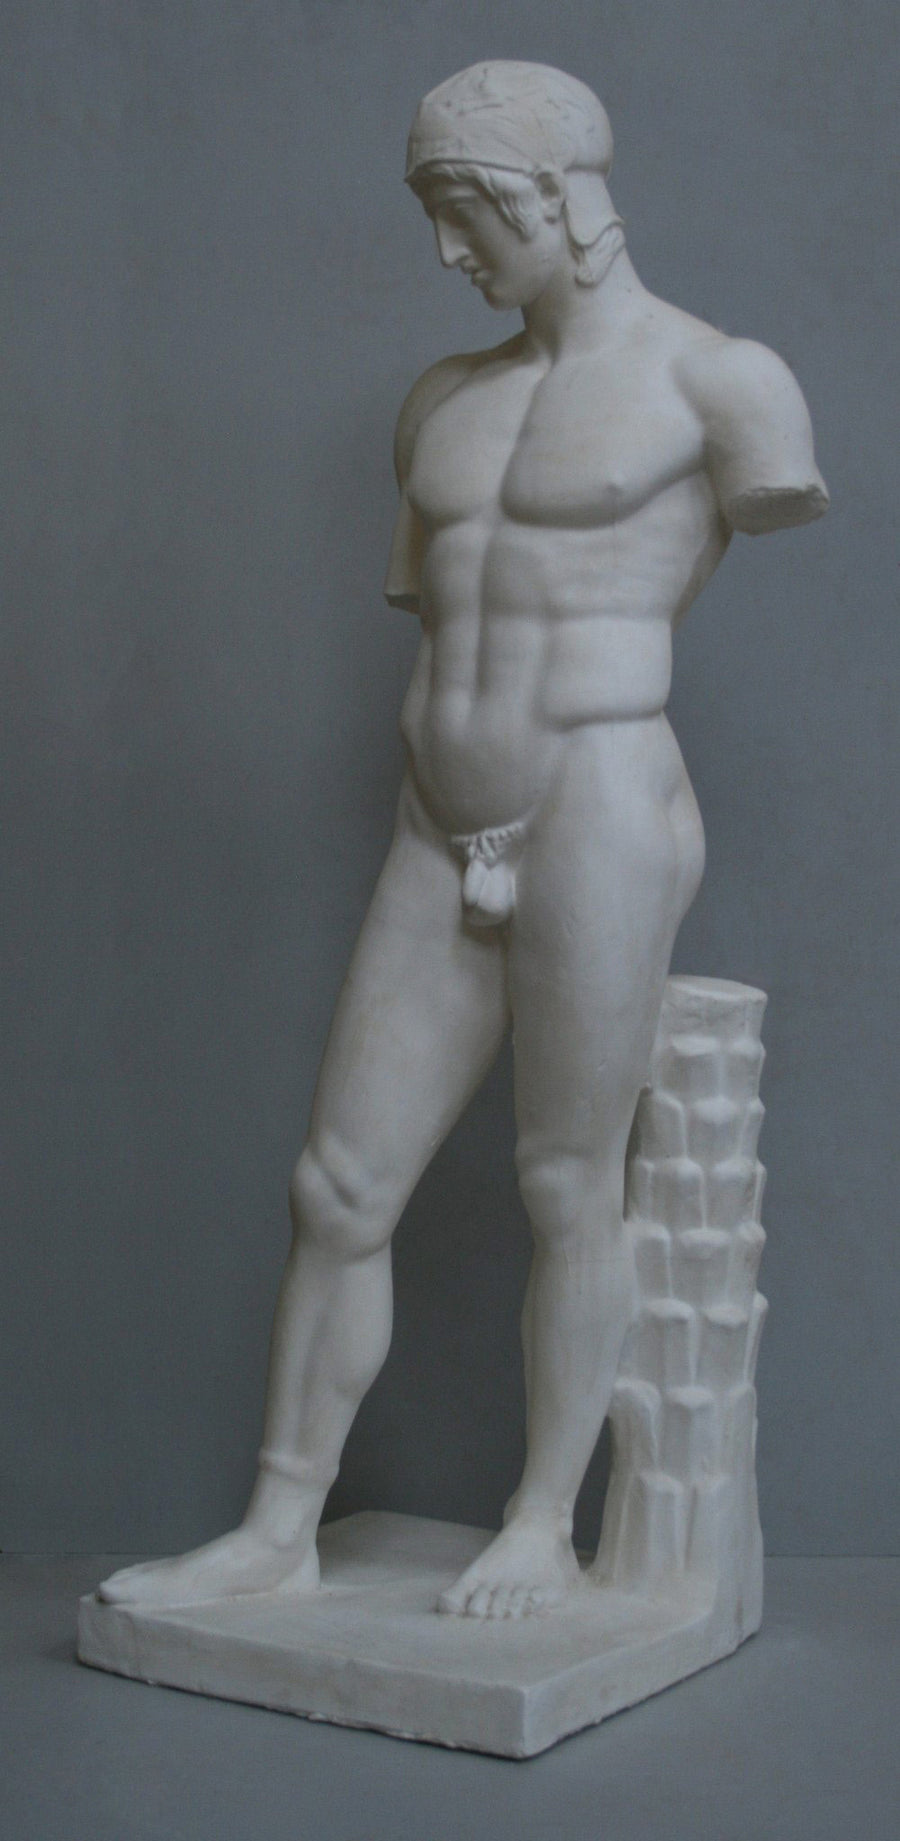 photo of plaster cast of sculpture of nude male, namely the god Ares, without arms and wearing a helmet with a supporting tree trunk, on a gray background